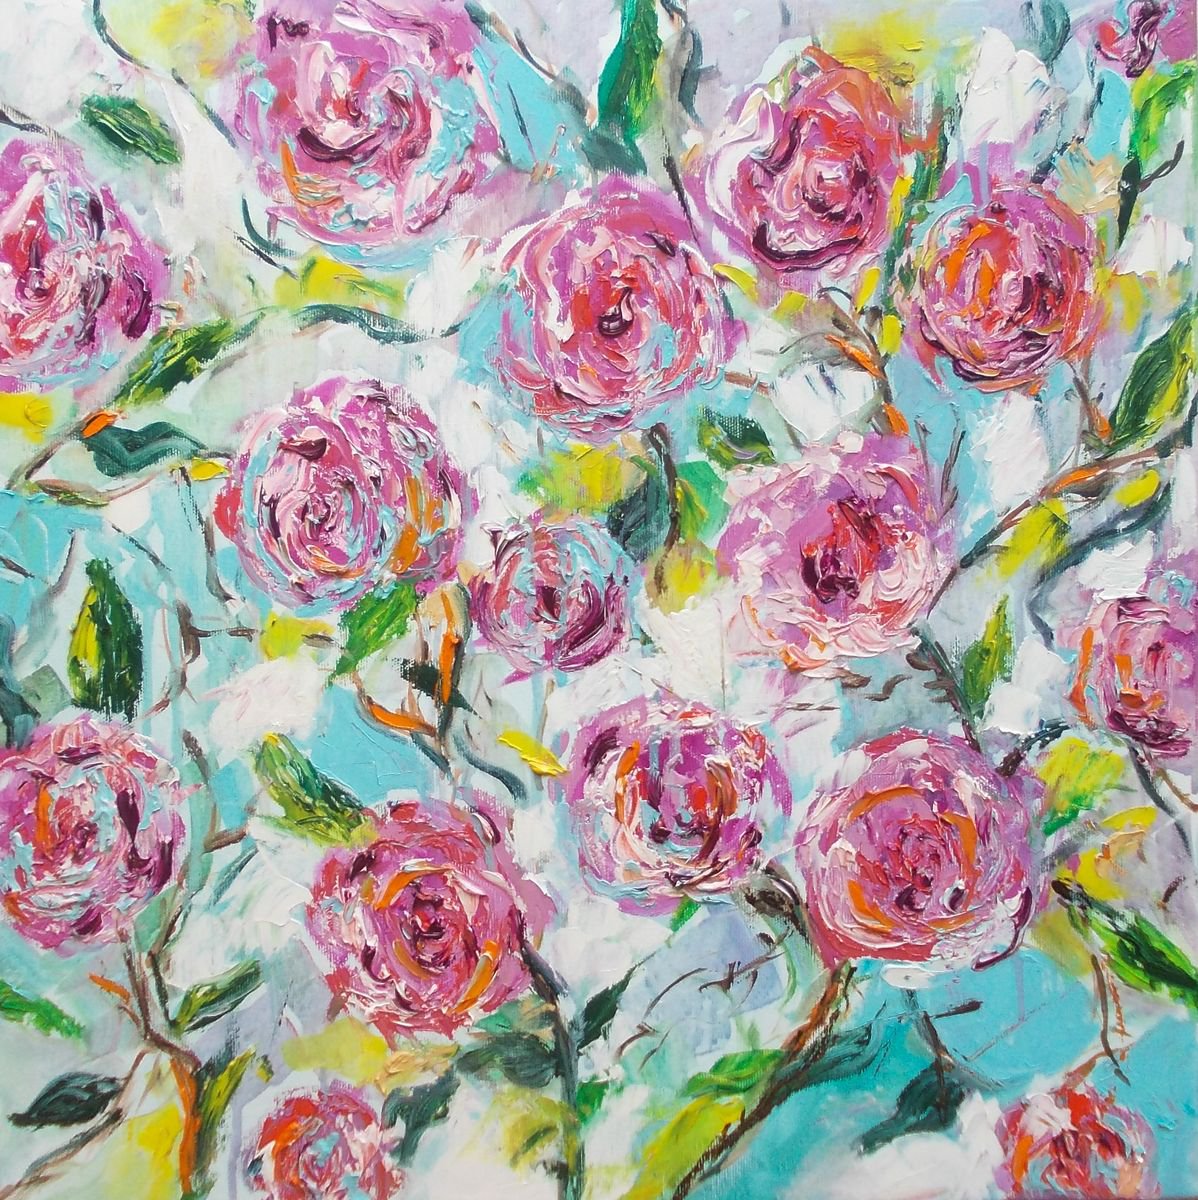 Promise-Roses oil painting-Garden with roses by Antigoni Tziora